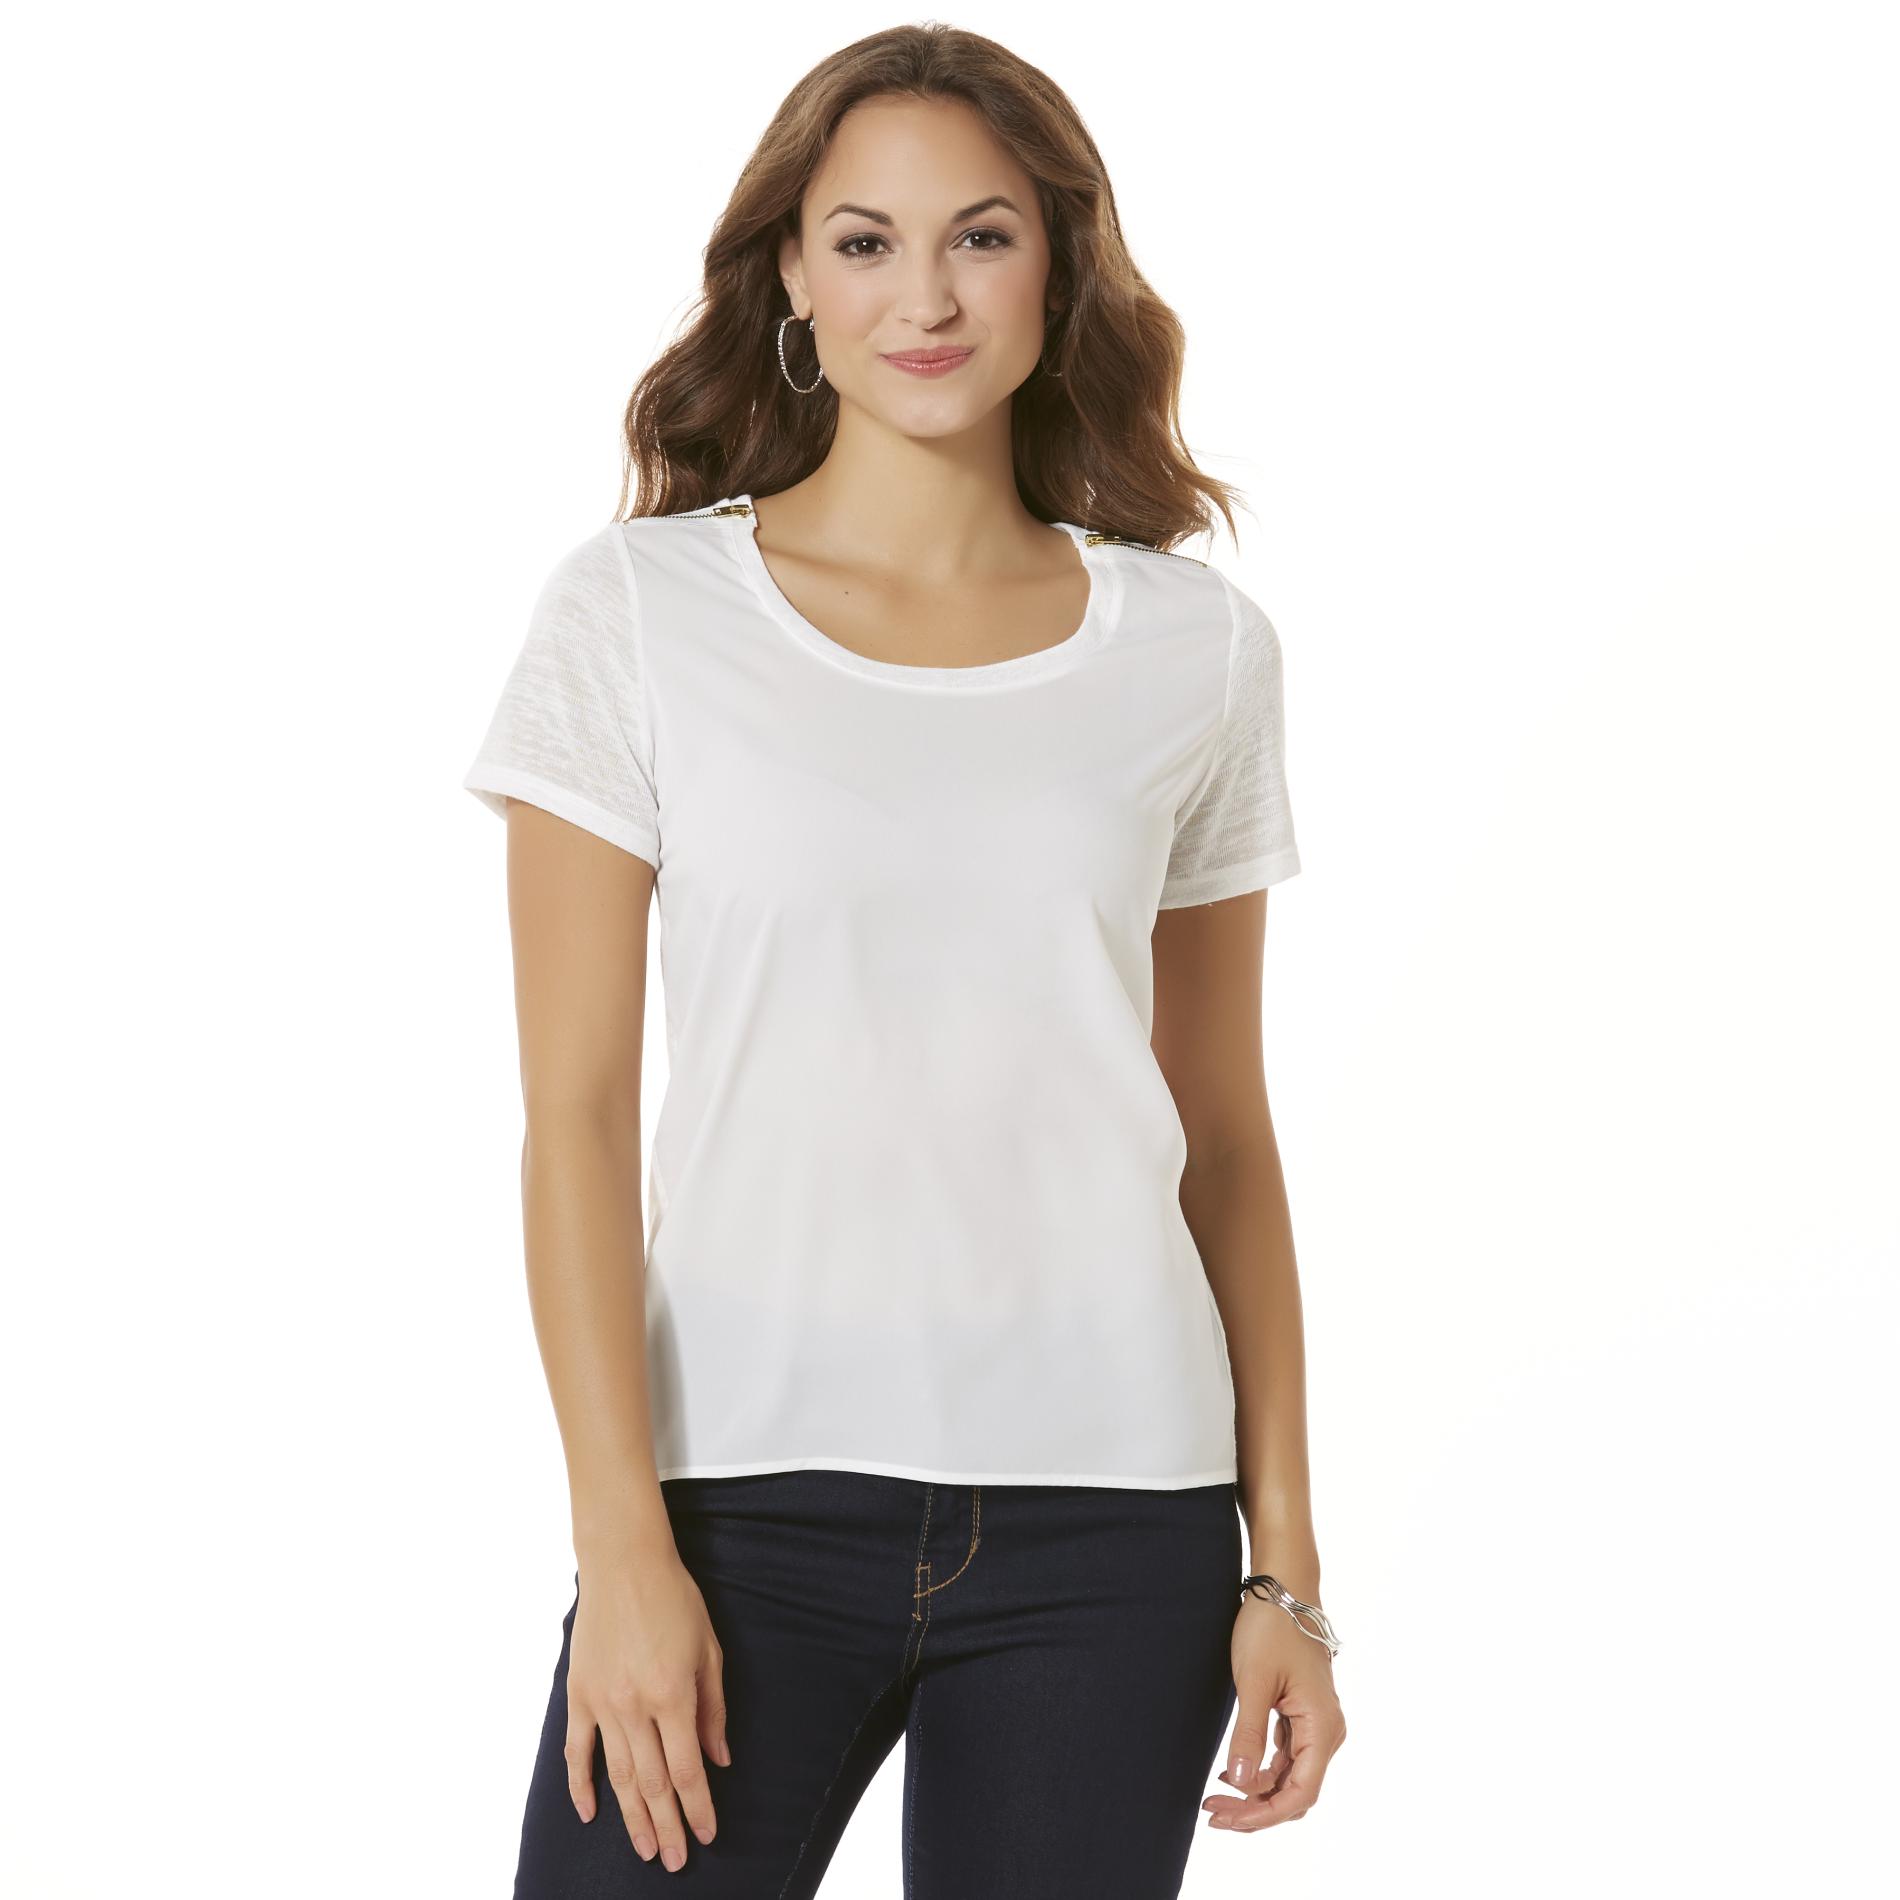 Attention Women's Mixed Media Top